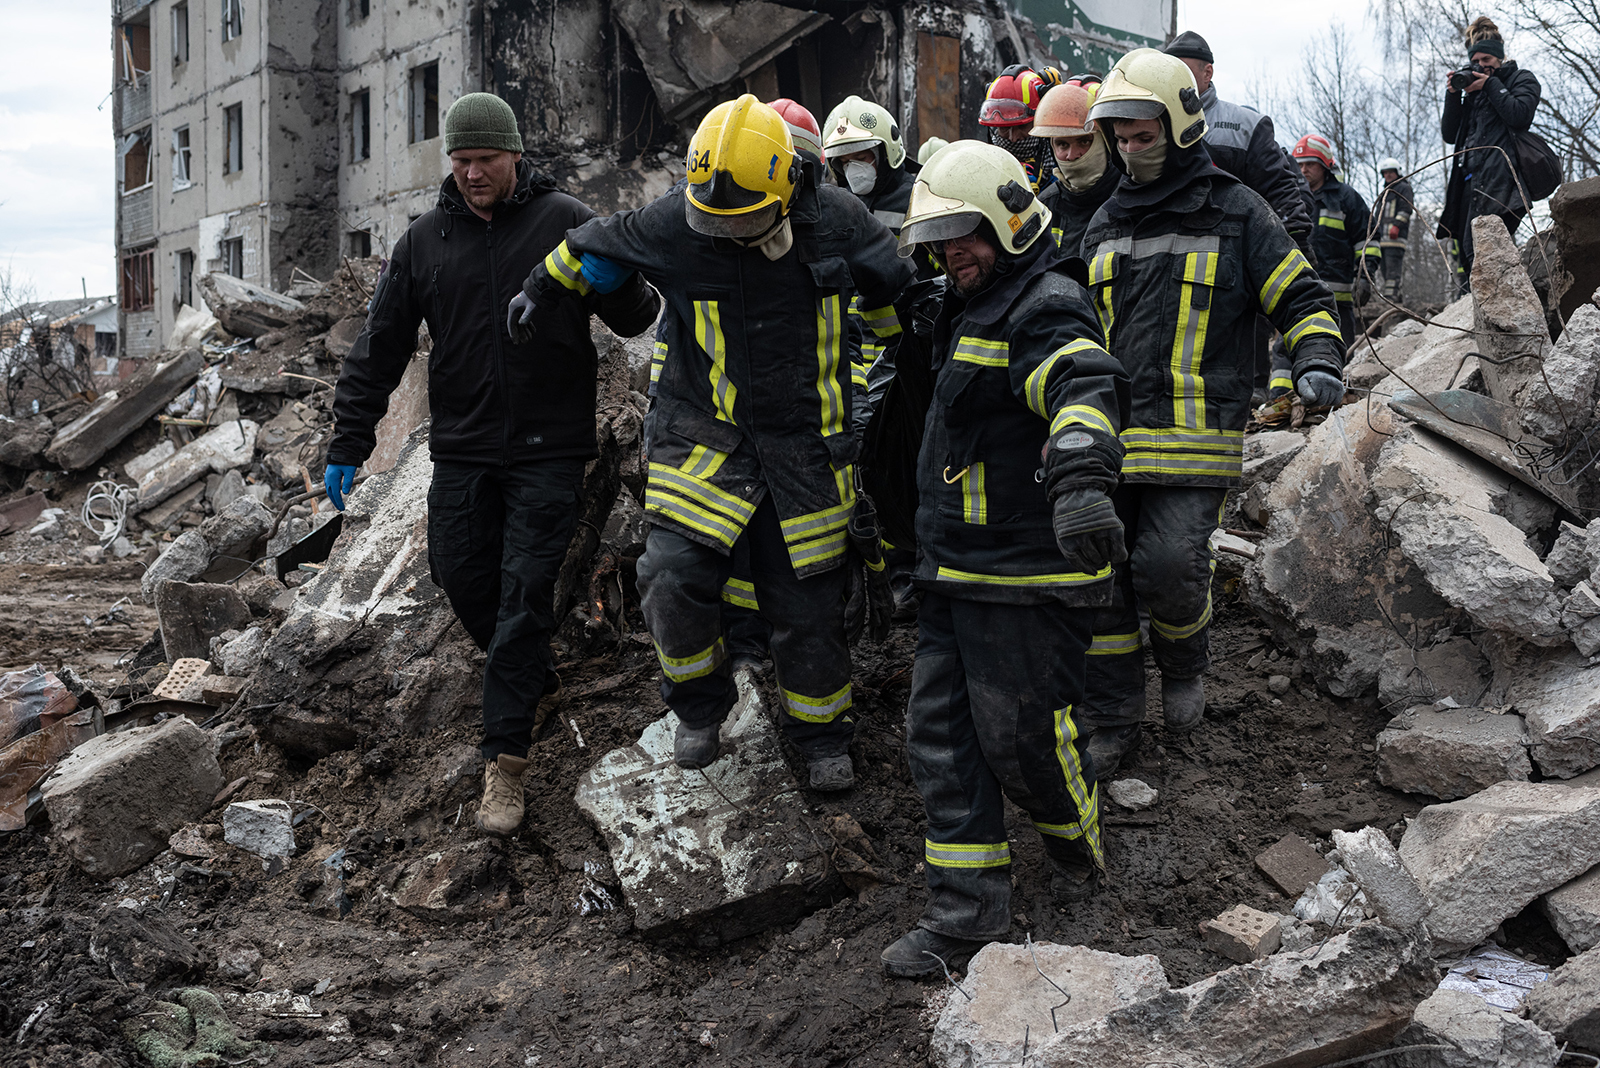 Rescue workers carry a body found among the rubble of a destroyed apartment building on April 9 in Borodianka, Ukraine.